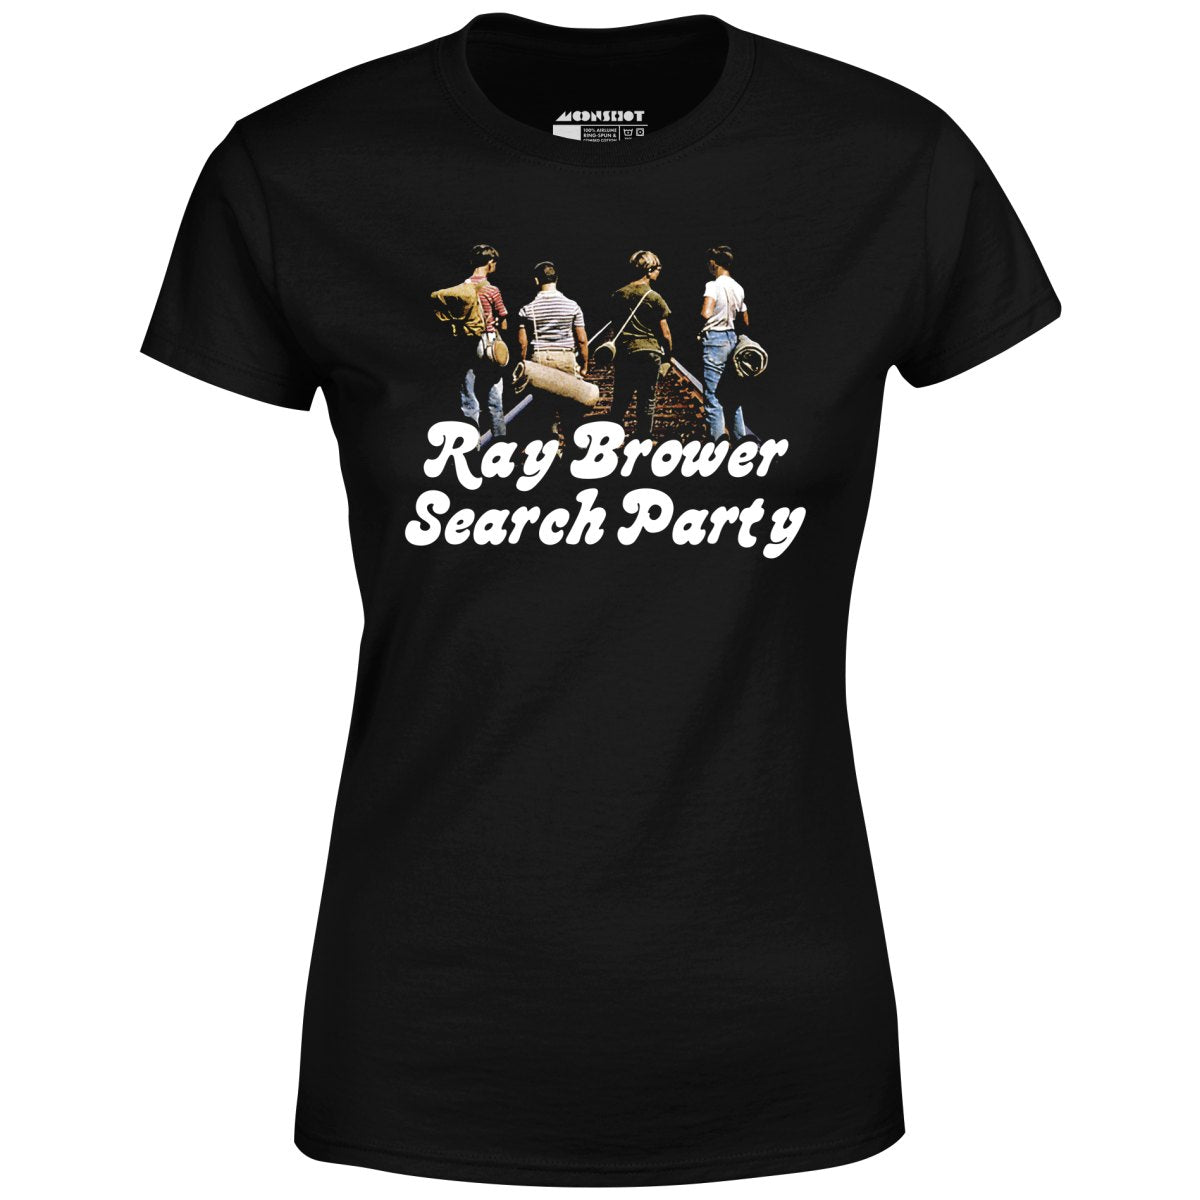 Ray Brower Search Party - Women's T-Shirt